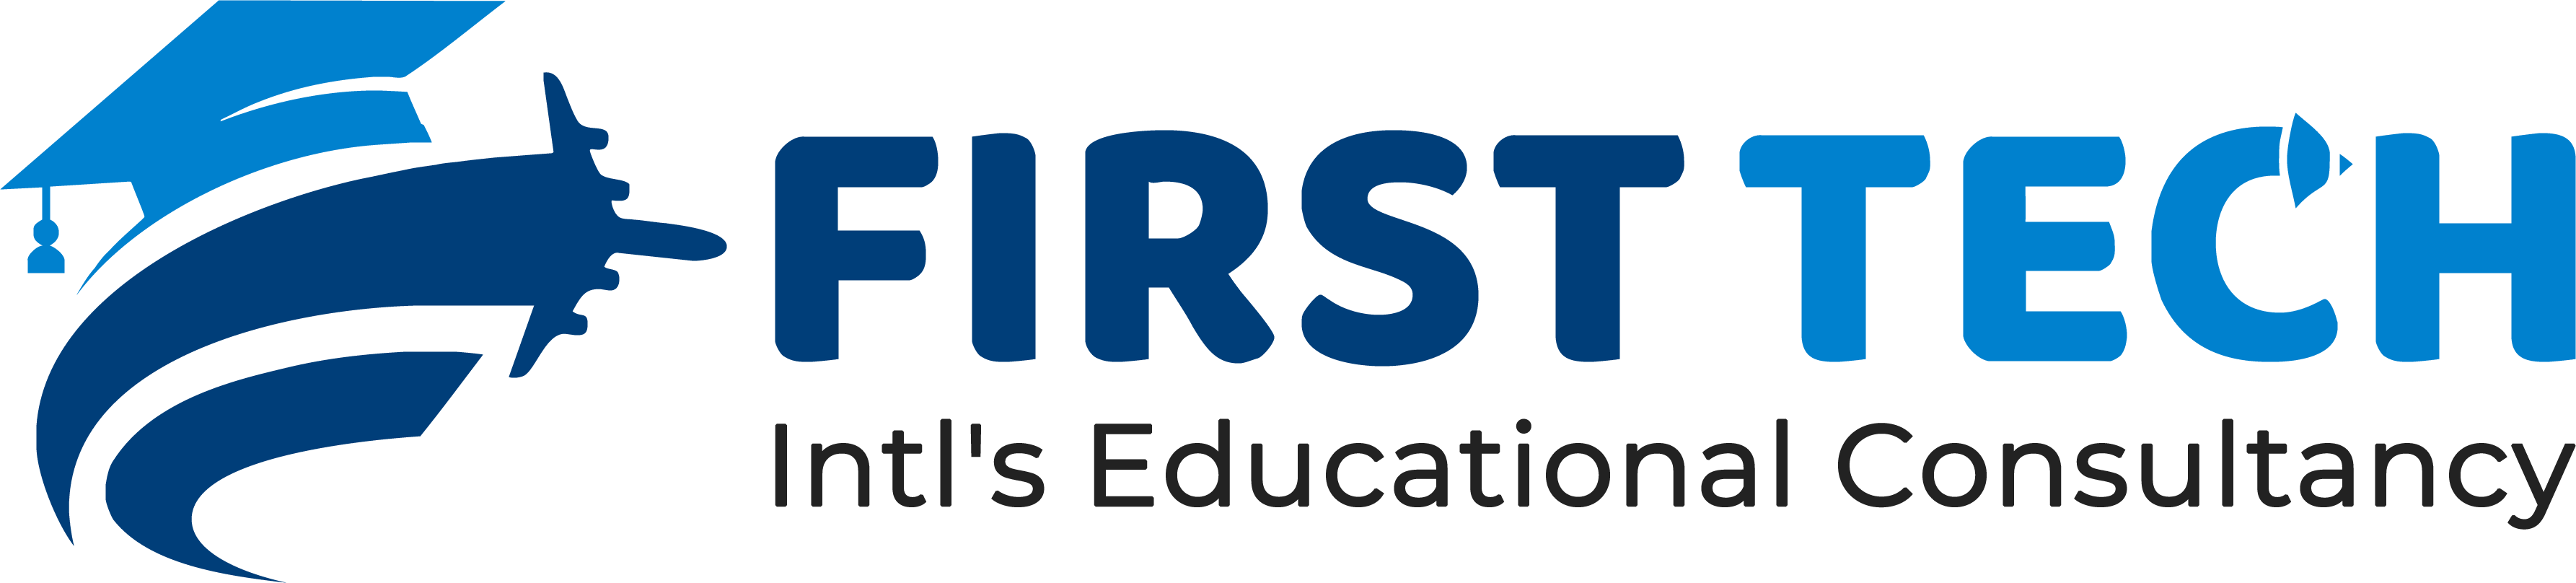 First Tech Intl's Education Consultancy